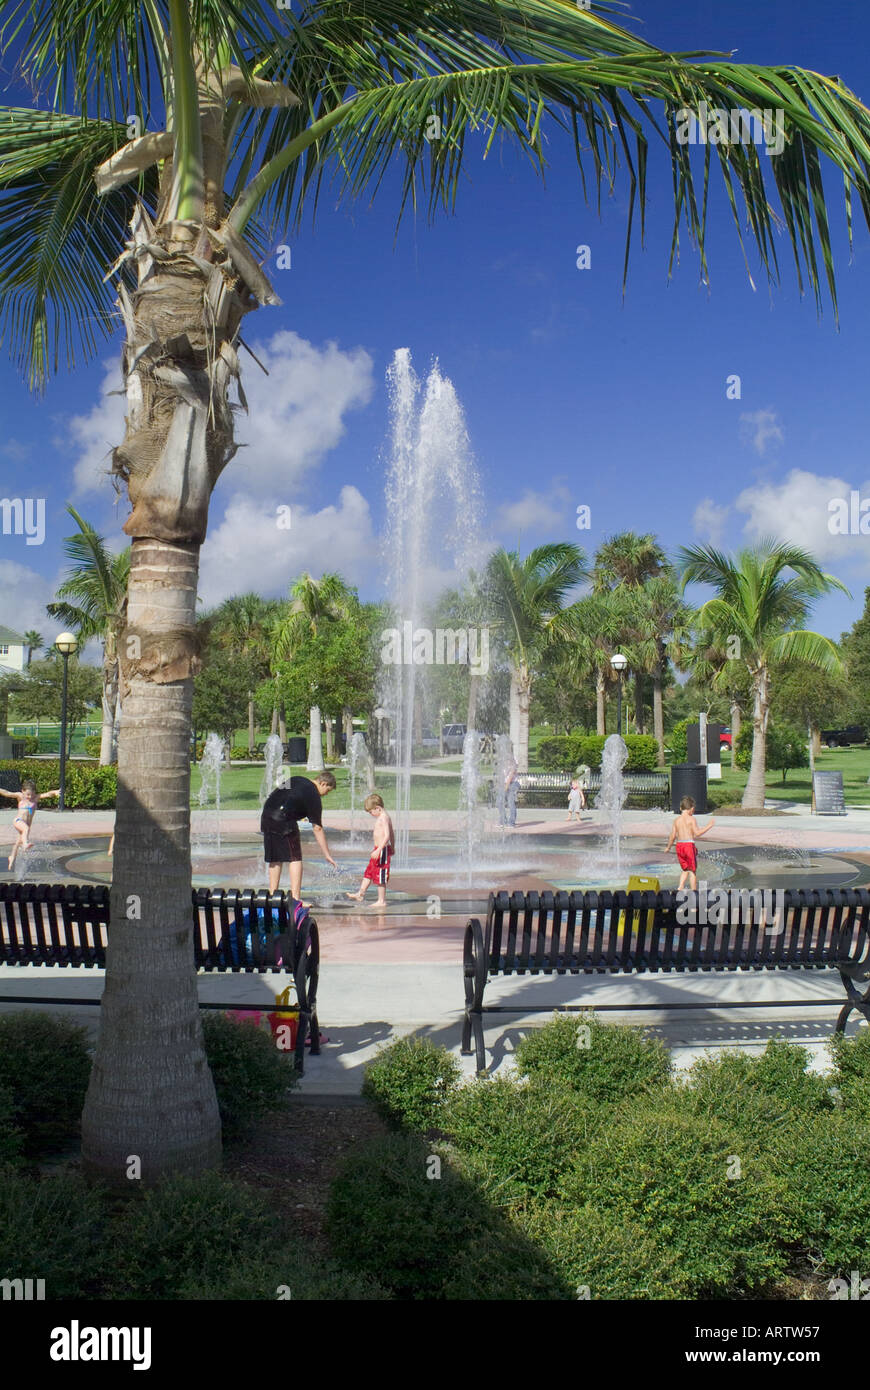 children playing in water fountain at a Florida park cooling off recreation fun wet fountains Stock Photo